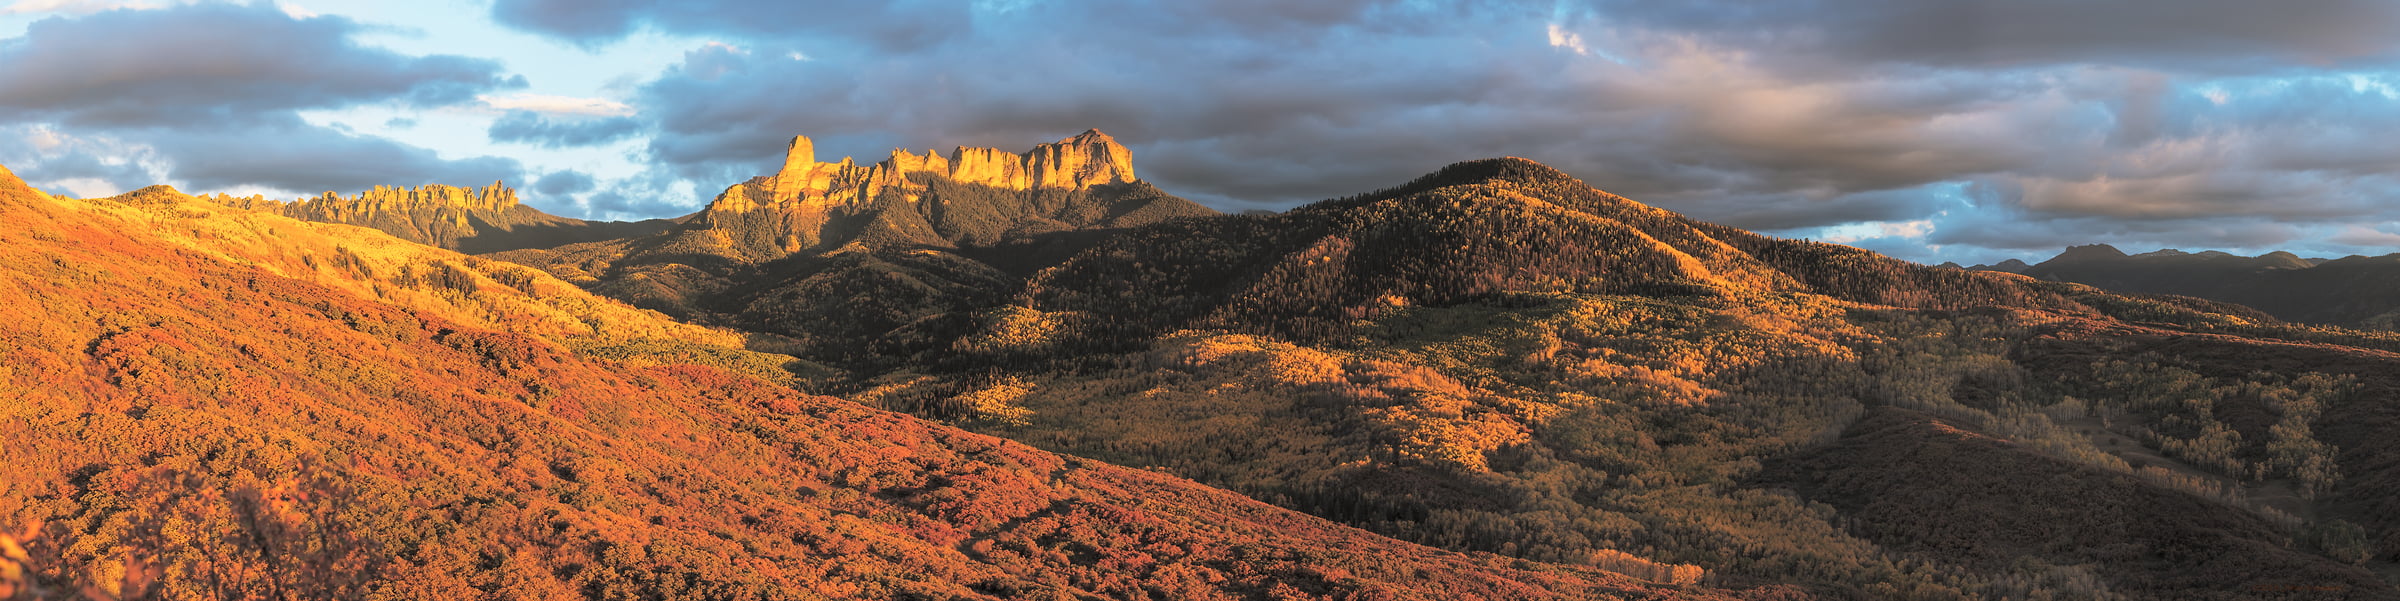 1,118 megapixels! A very high resolution, panorama photo of forested hills and mountains in Colorado at sunset; landscape photograph created by John Freeman in Owl Creek Range, Ridgeway, Colorado.